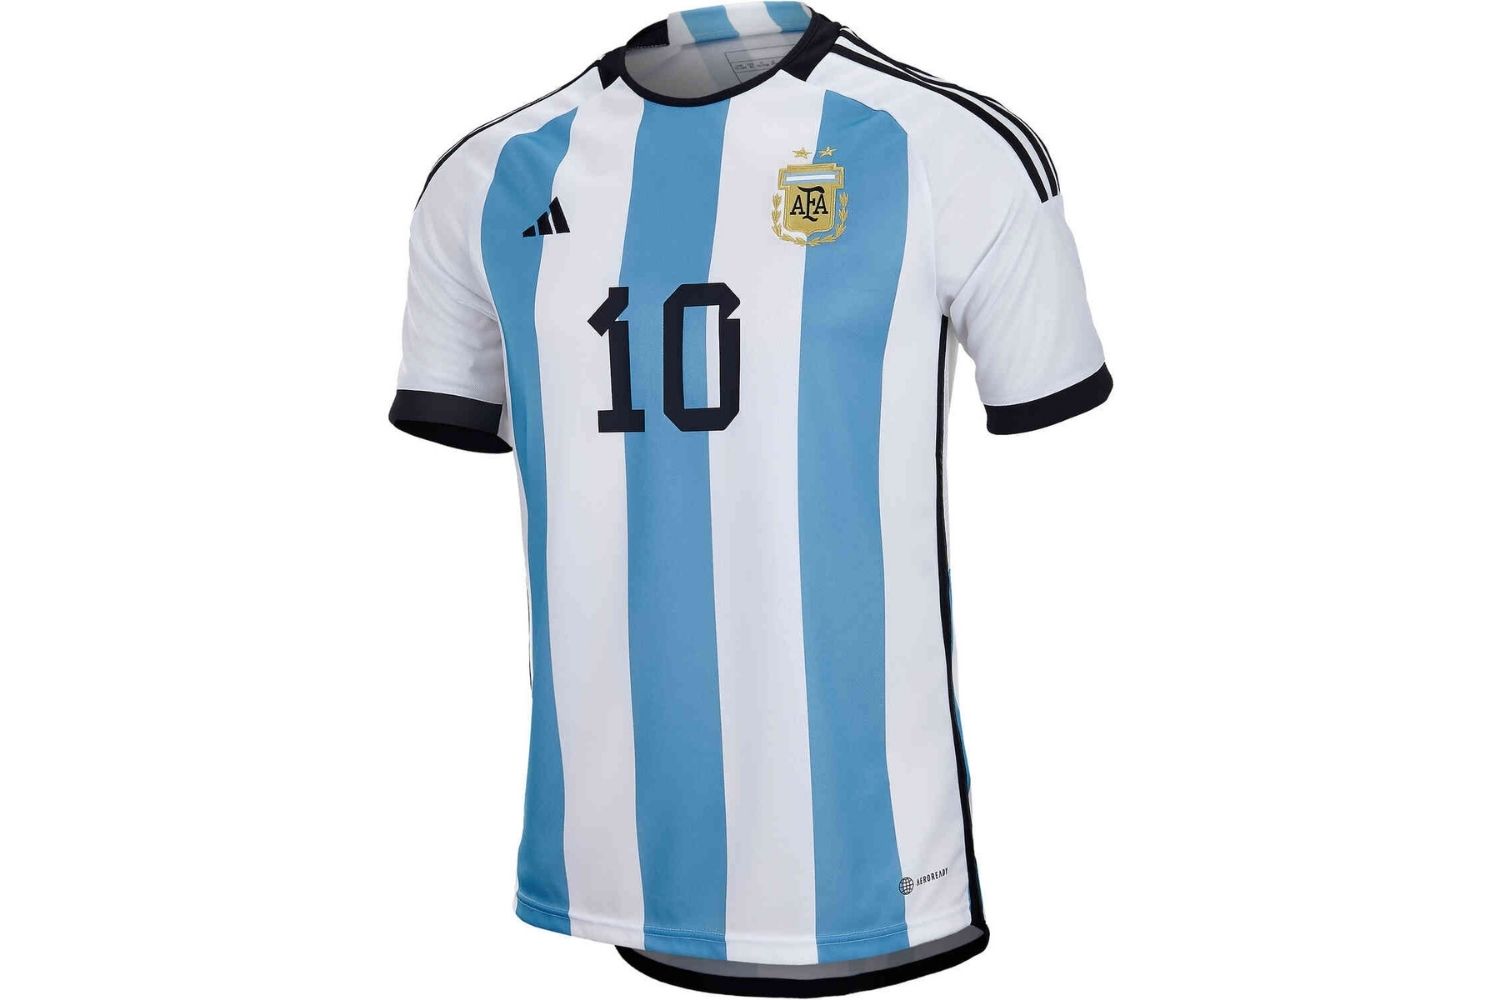 Messi Jersey Argentina - Facts.net